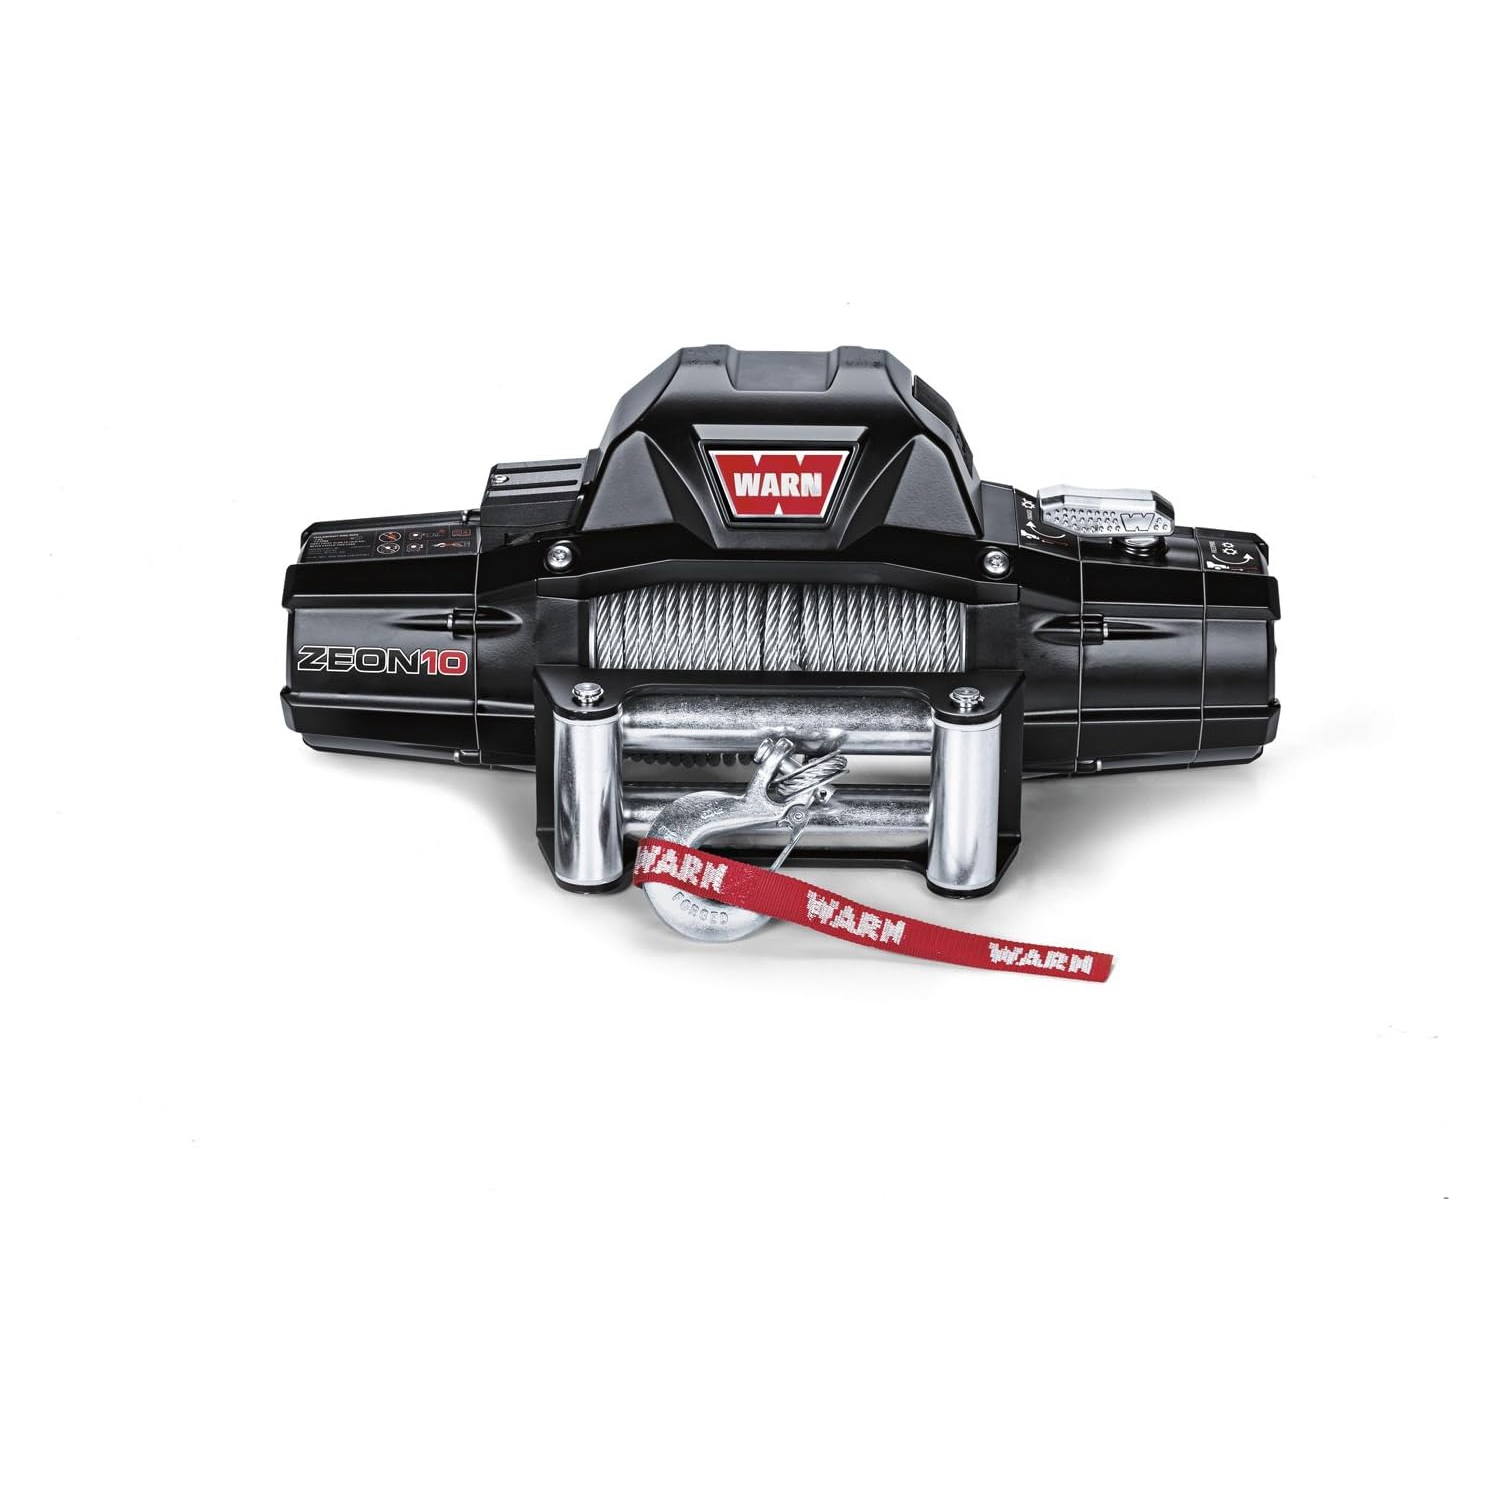 Warn 88990 ZEON 10 Winch with Wire Rope - 10000 lb. Capacity